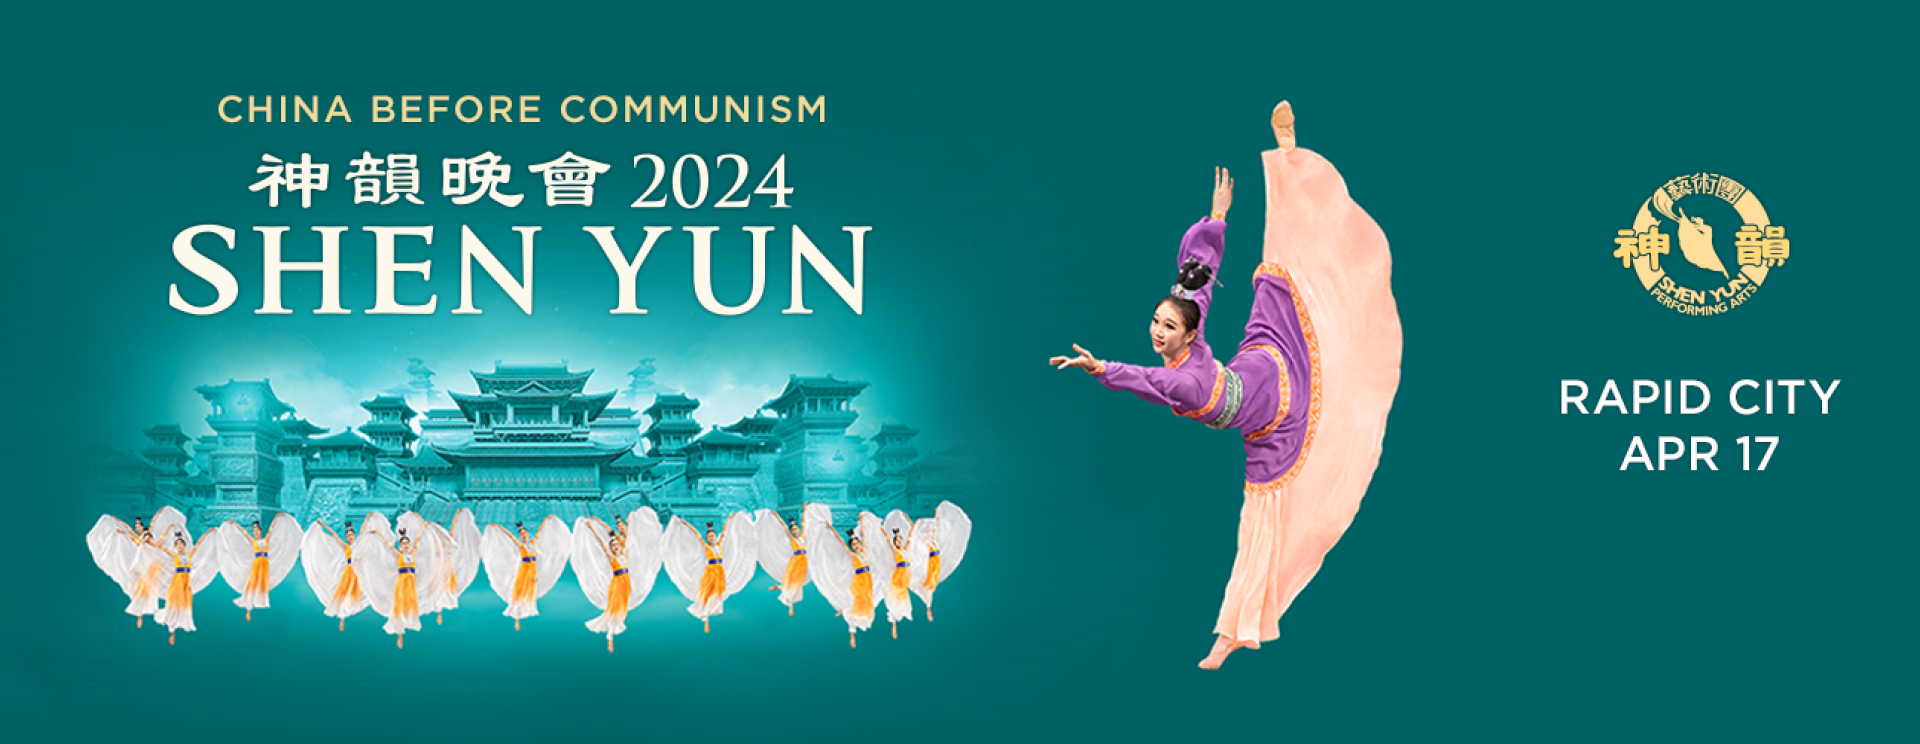 Shen Yun - Premier classical Chinese dance company-The Monument